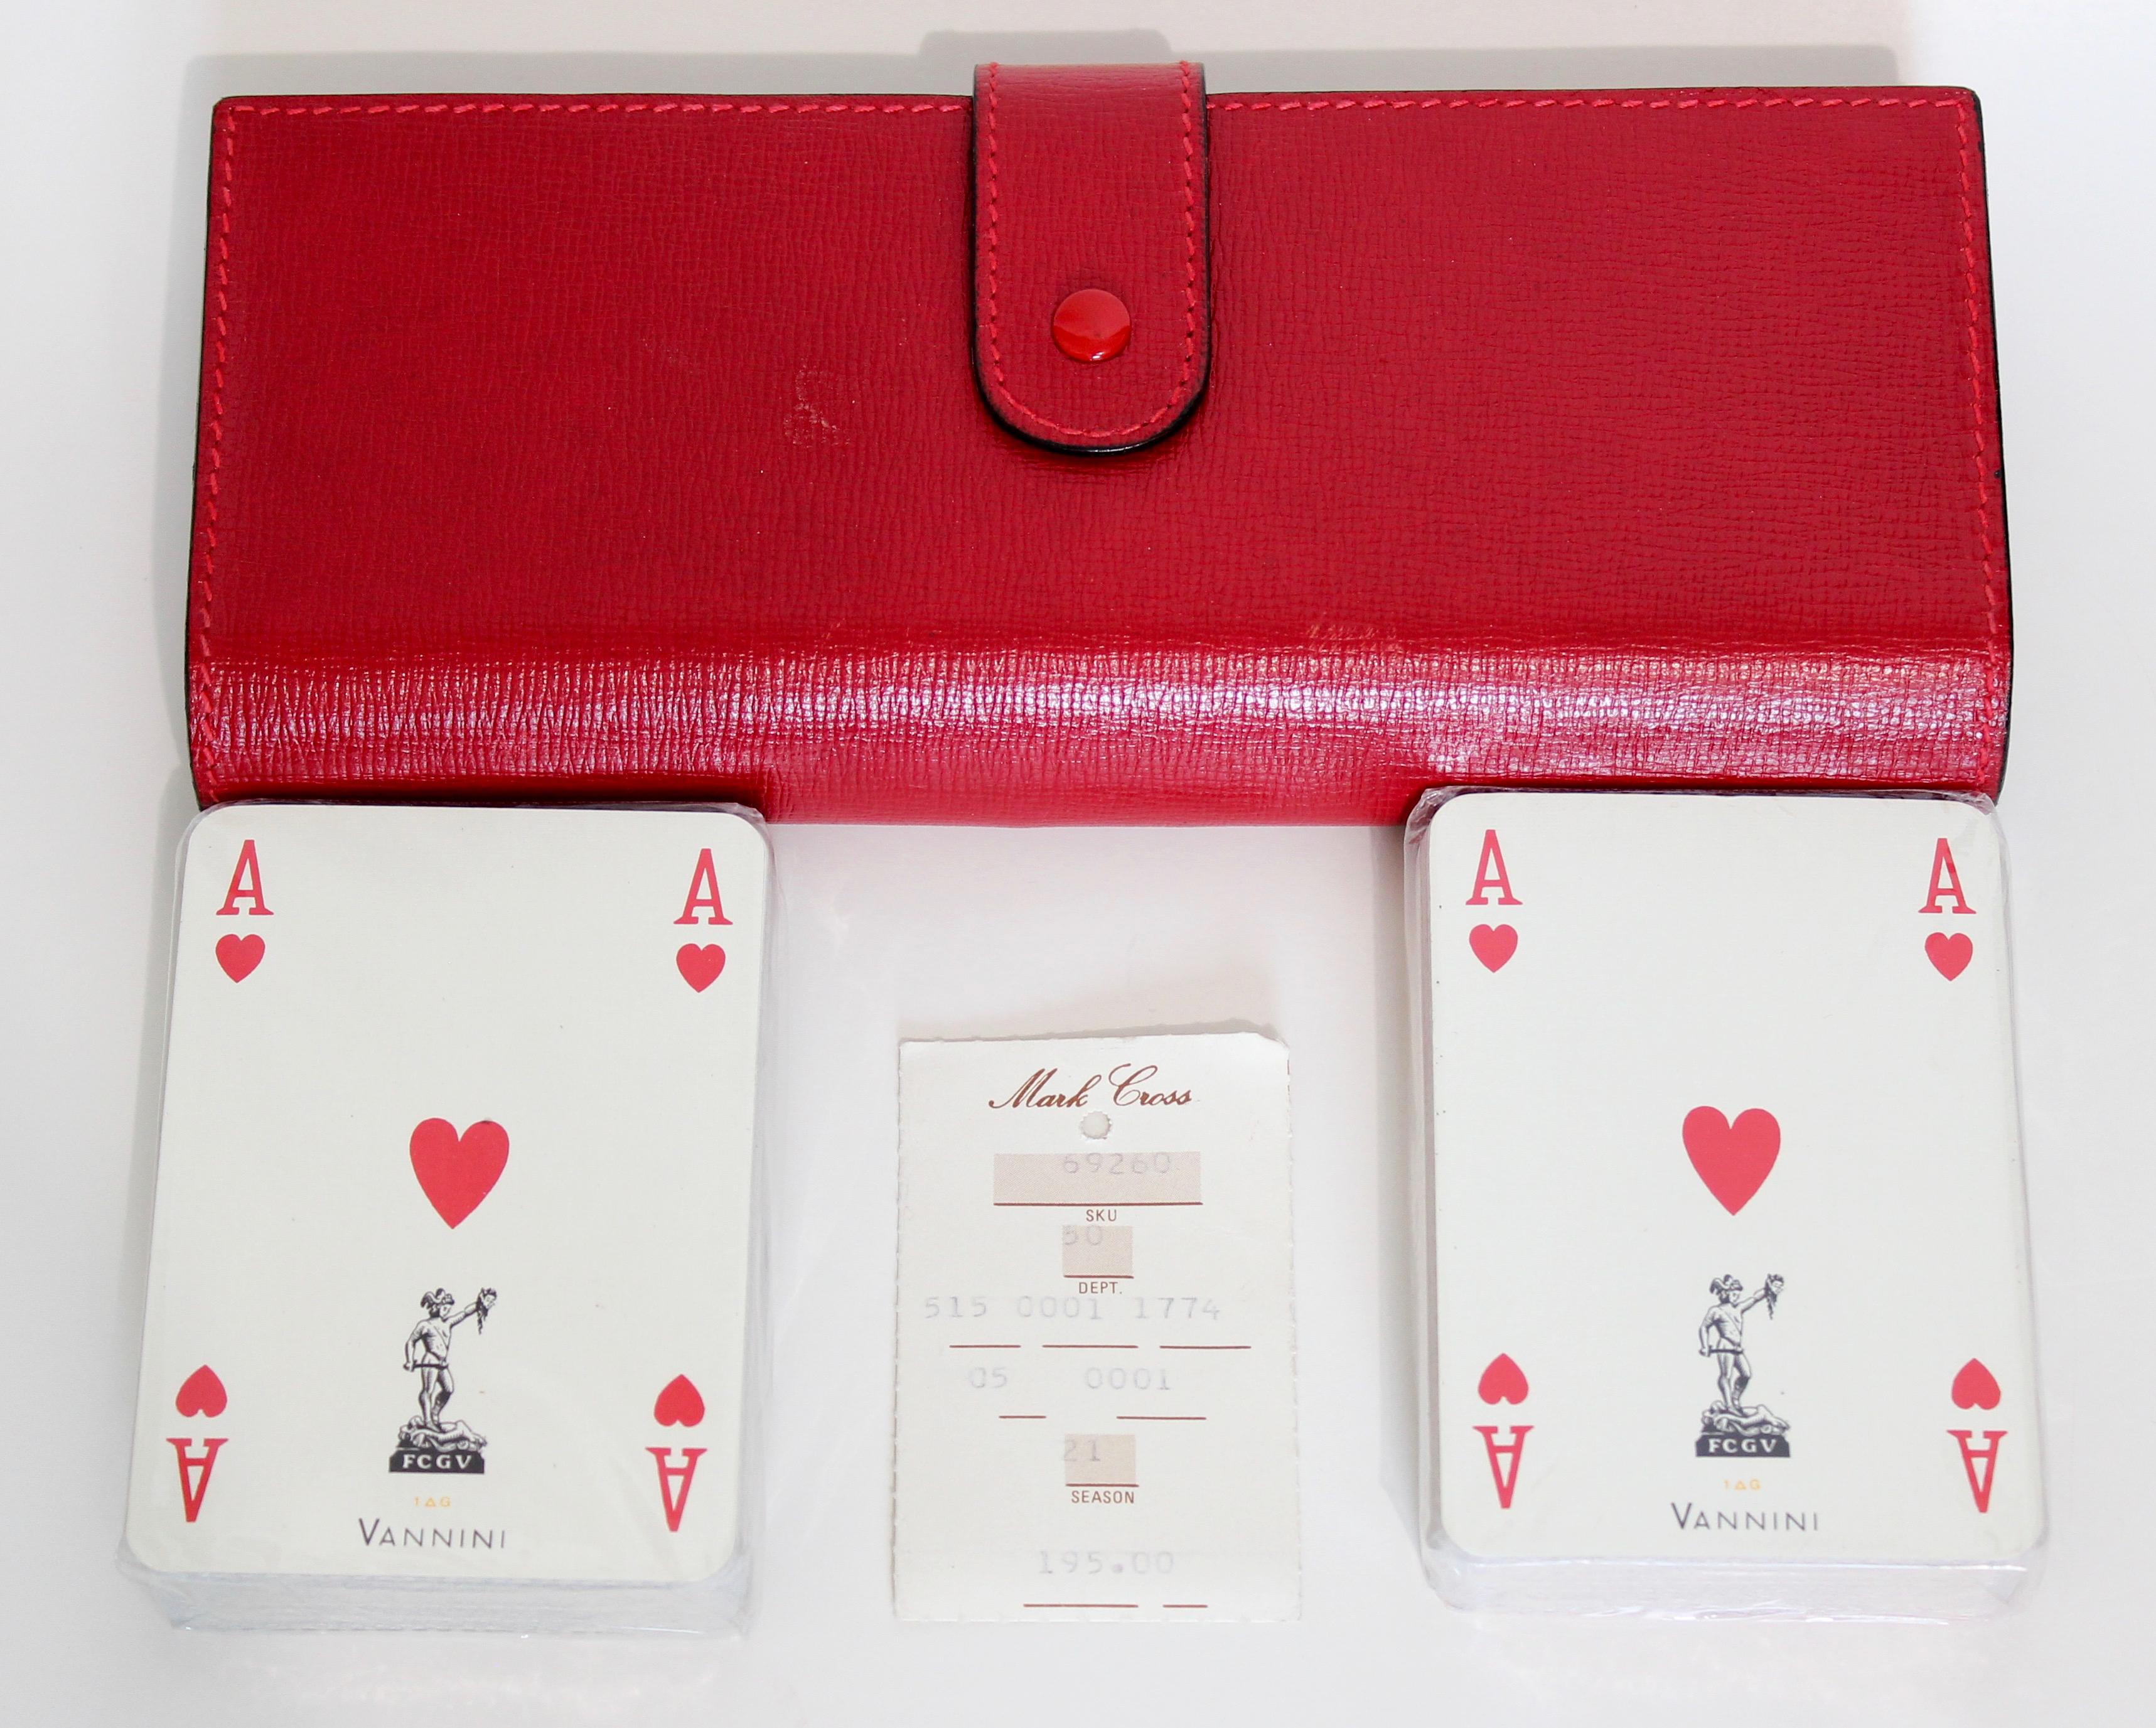 New Mark Cross Red Saffiano Leather Game Set Travel Playing Cards Notepad & Pen  For Sale 3